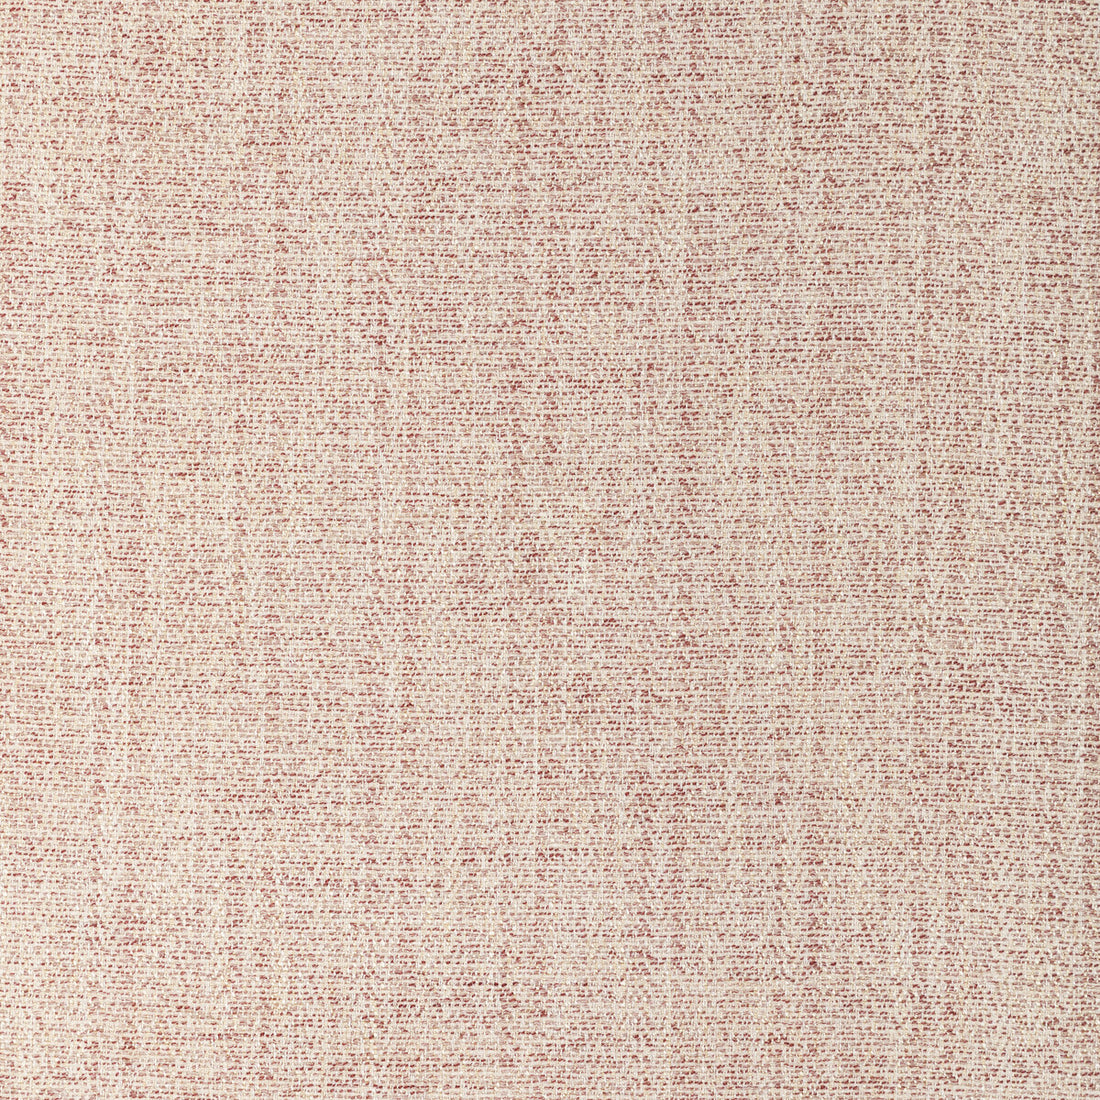 Alfaro Weave fabric in brick color - pattern 2021107.19.0 - by Lee Jofa in the Triana Weaves collection